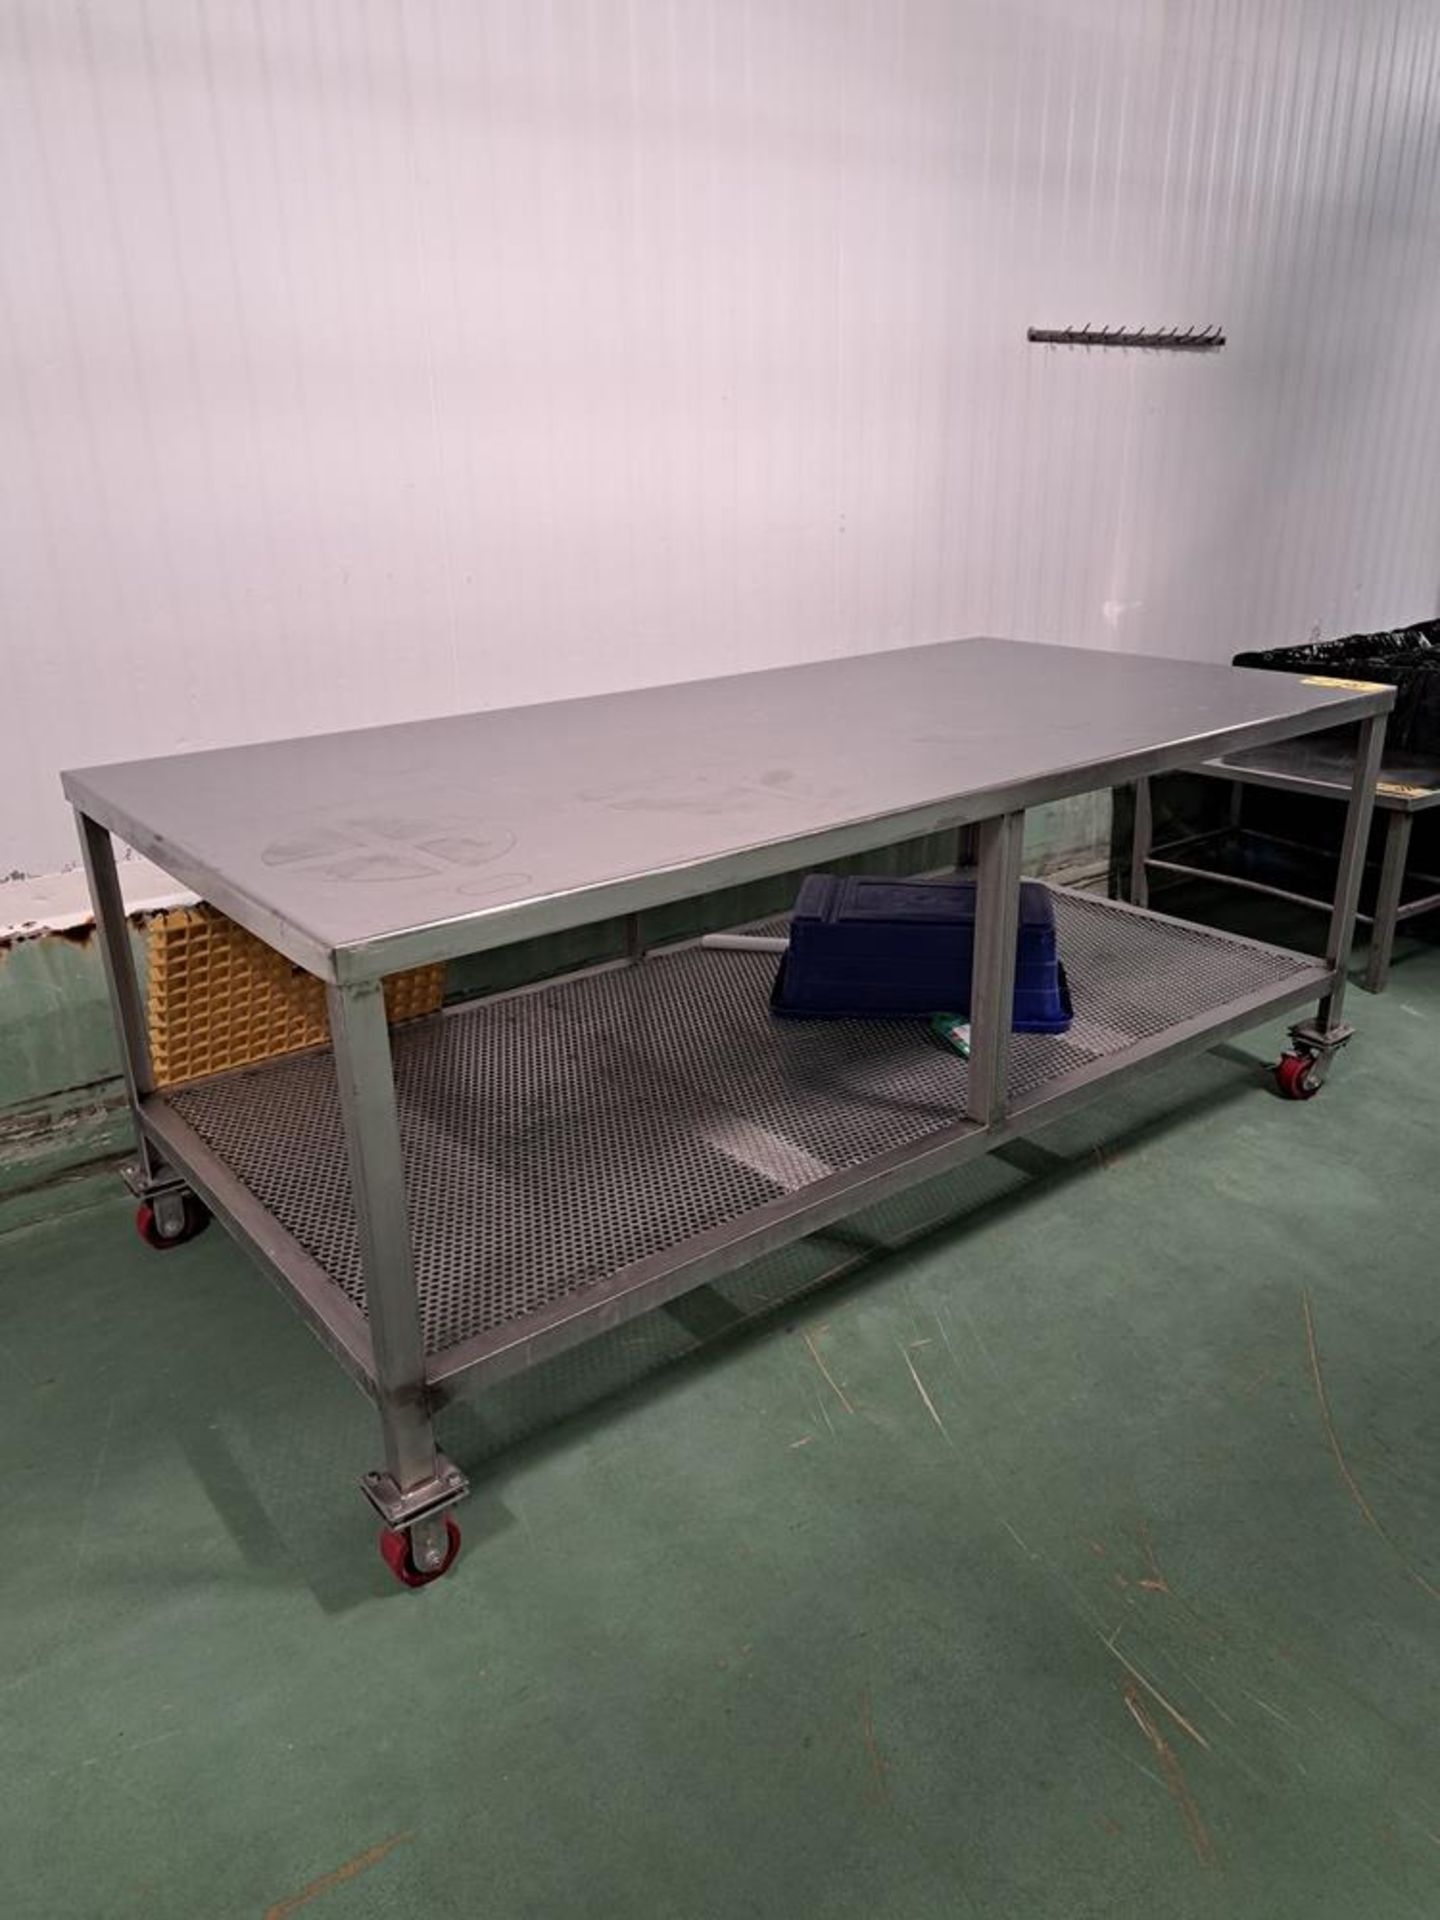 Portable Stainless Steel Table, 44" W X 92" L X 36" T : Required Loading Fee $75.00, Rigger-Norm